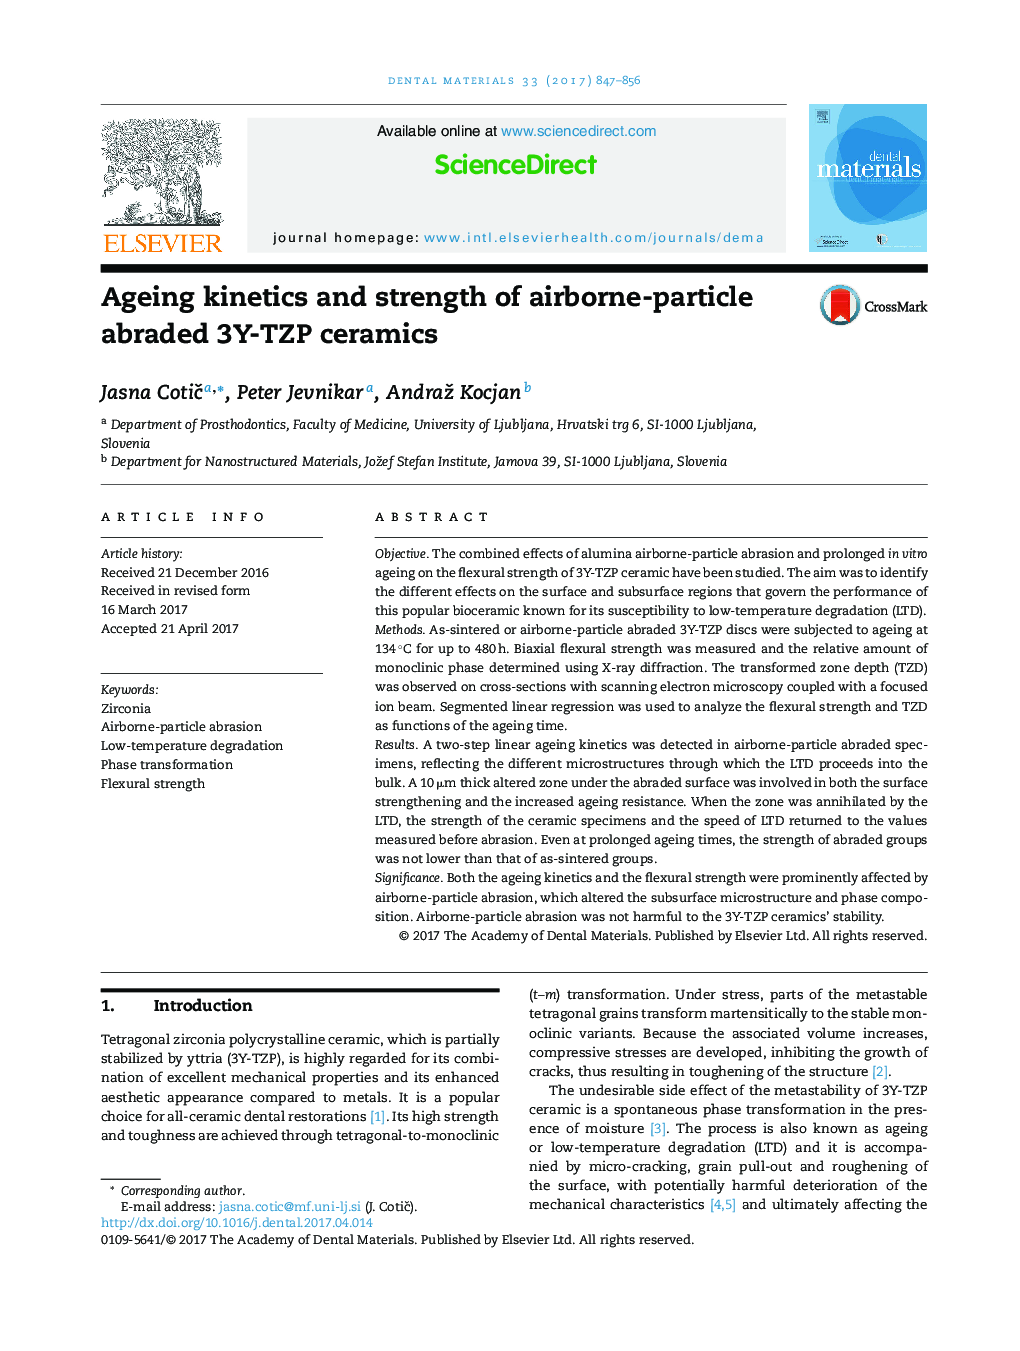 Ageing kinetics and strength of airborne-particle abraded 3Y-TZP ceramics